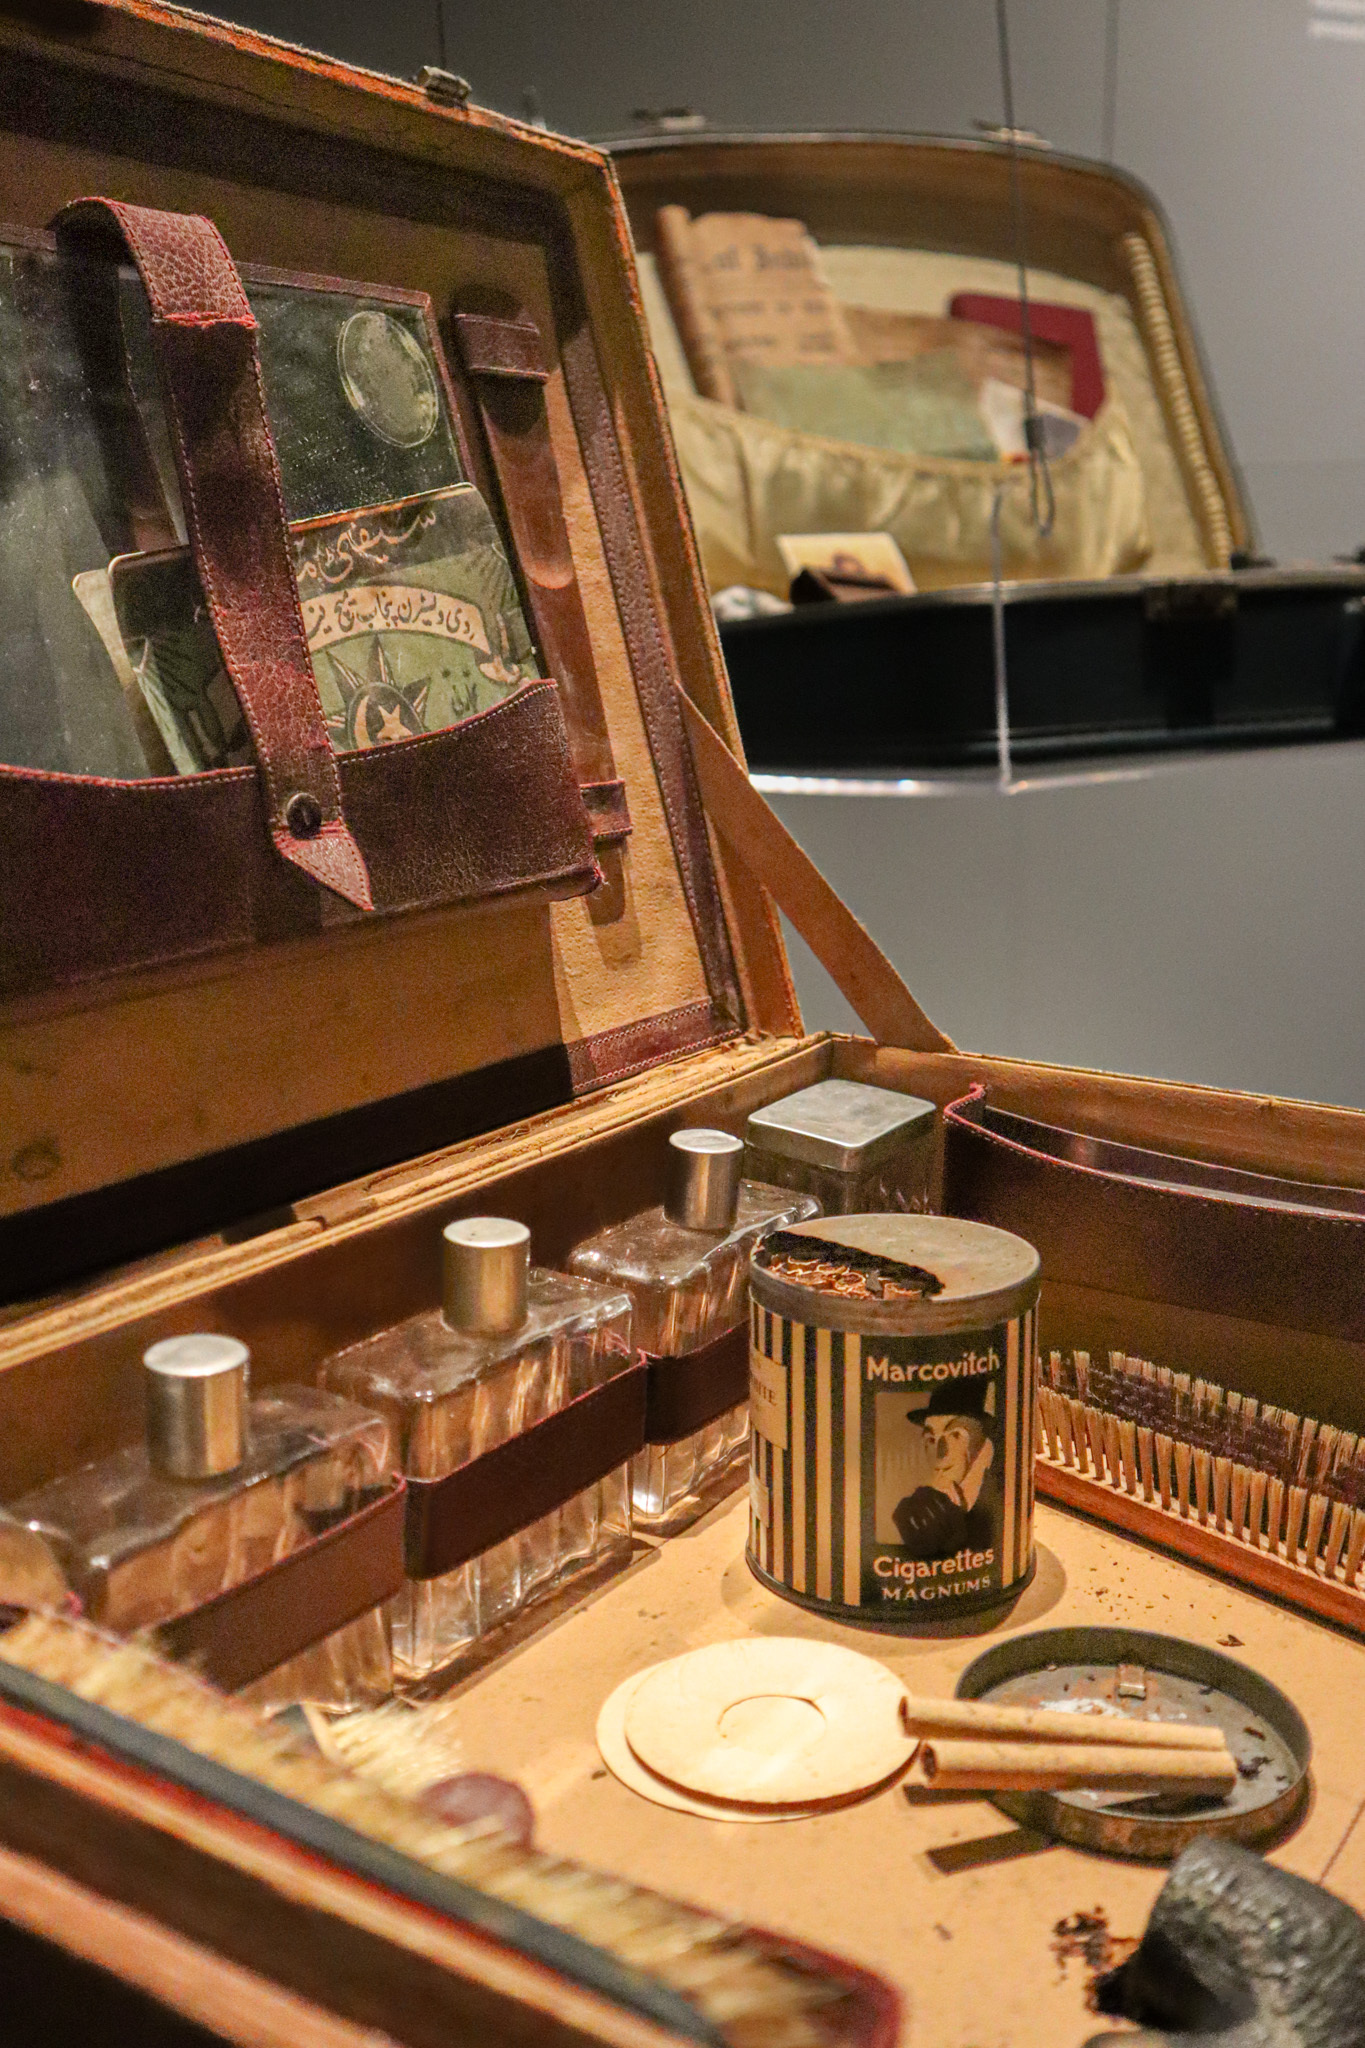 An open suitcase shows a tube of cigarettes from the 40s, glass bottles and other trinkets